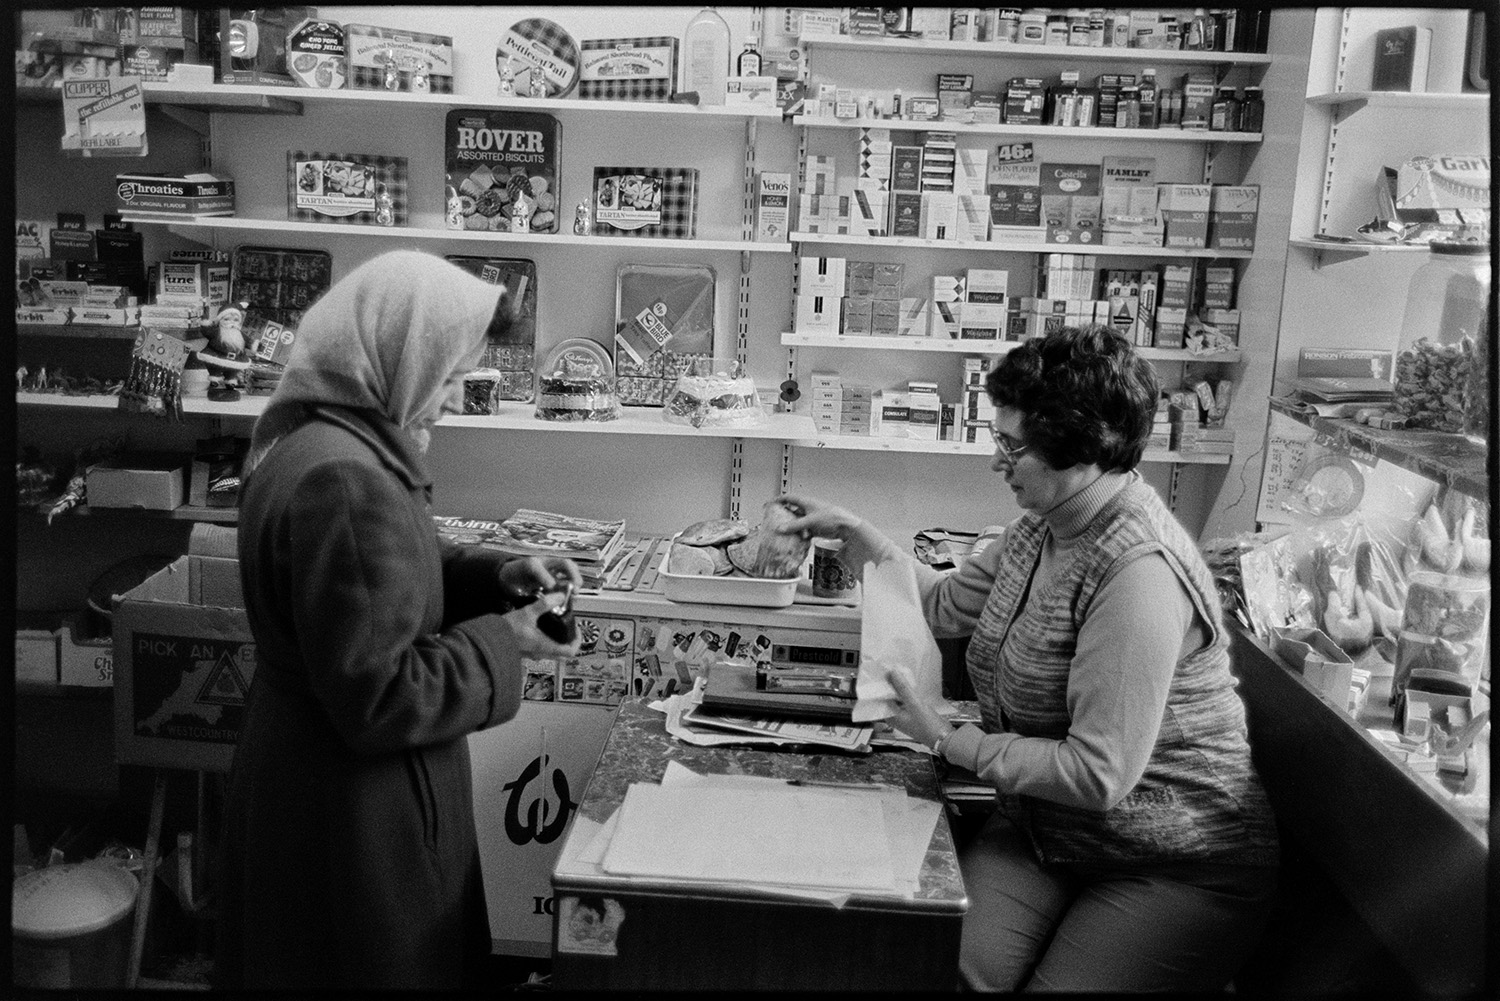 Women at till of grocers shop. 
[A woman serving a customer at the counter of the London House Stores in Fore Street, Dolton. Shelves with cigarettes, tins of biscuits and ornaments are visible in the shop.]